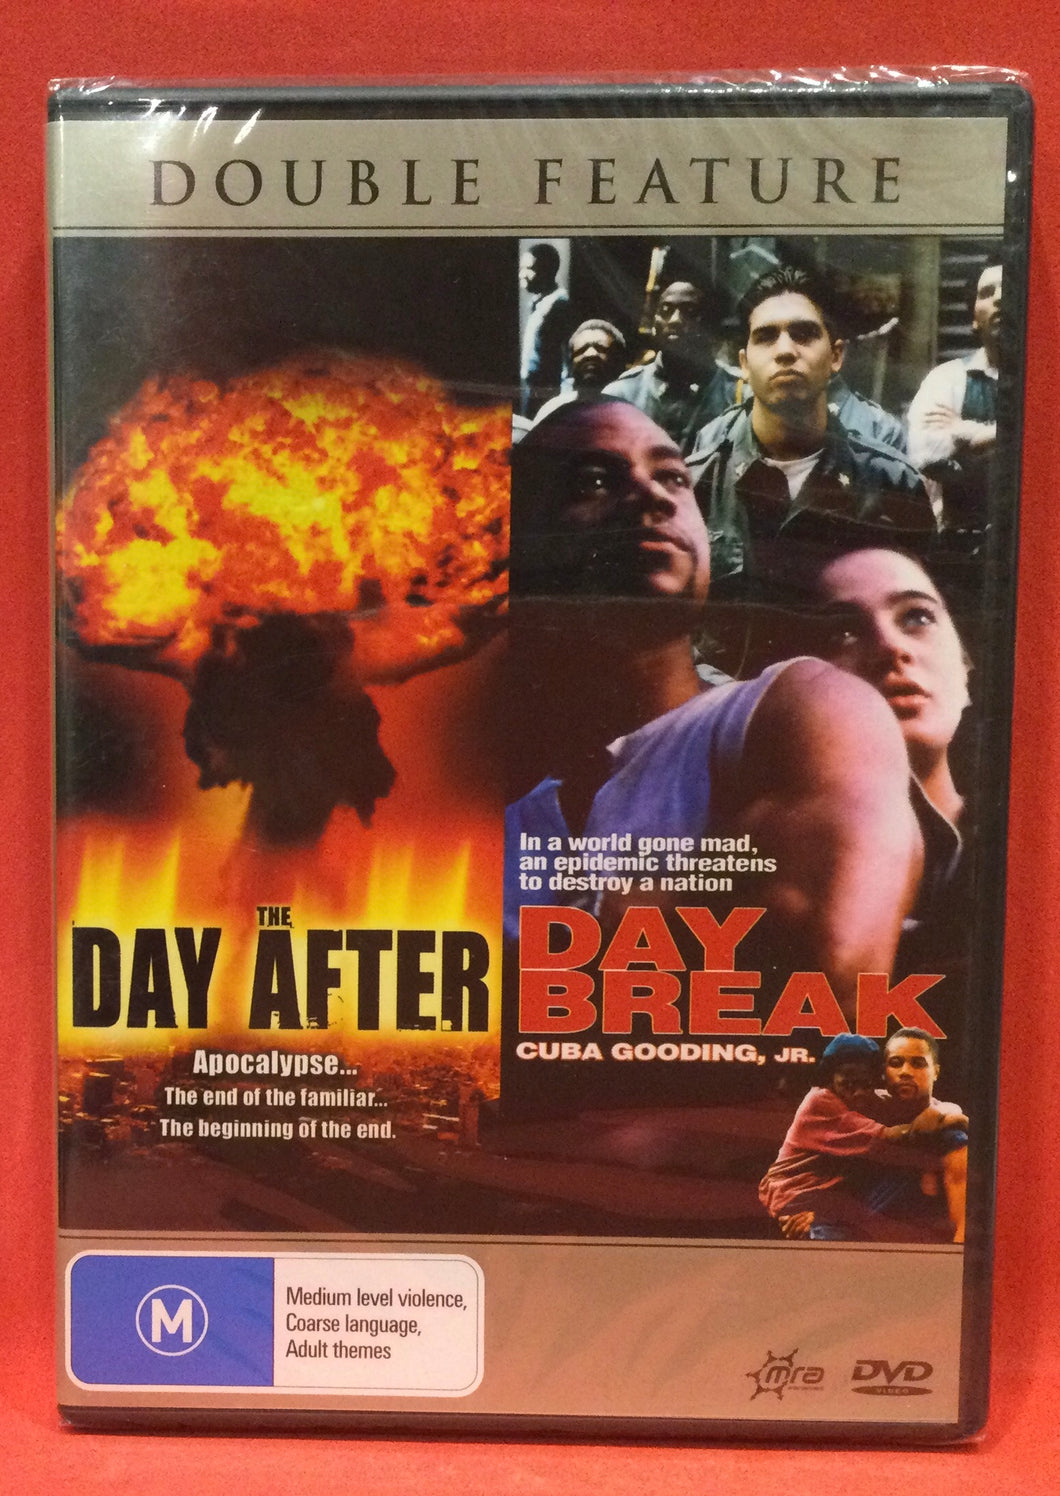 DAY AFTER, THE & DAY BREAK - DOUBLE FEATURE DVD (SEALED)